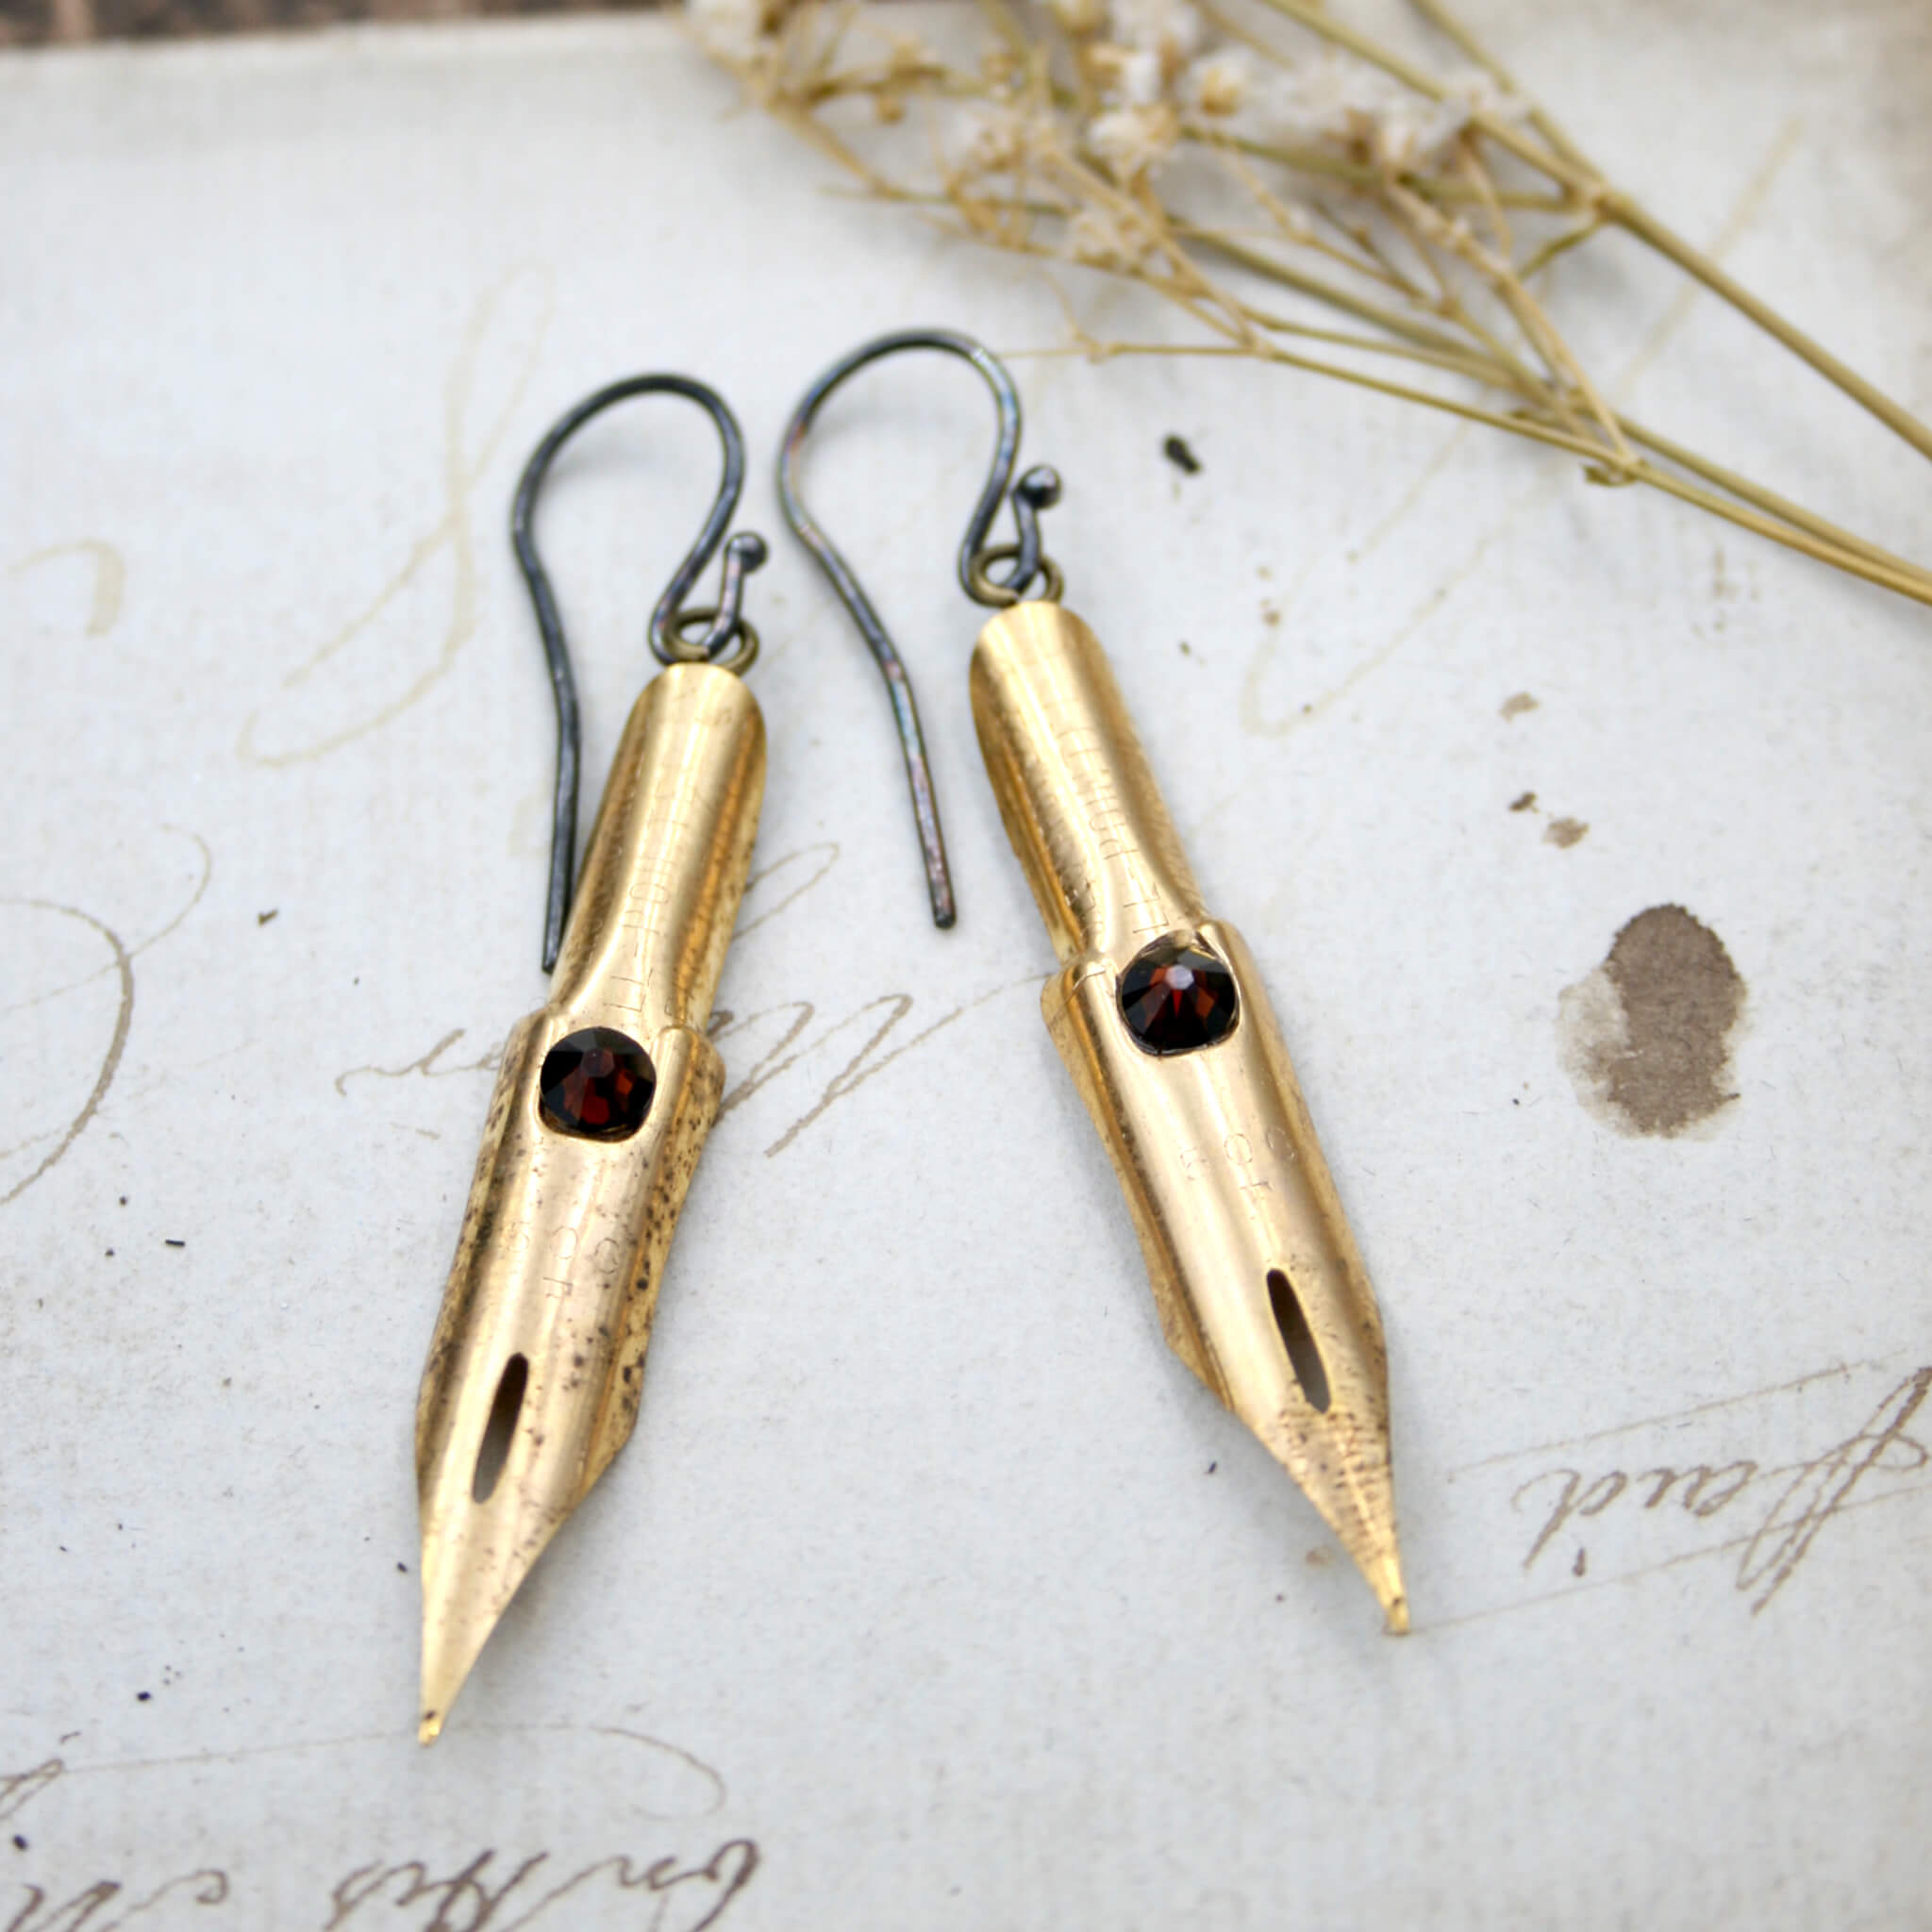 dark academia earrings made of gold coated pen nibs with smoked topaz swarovski crystals